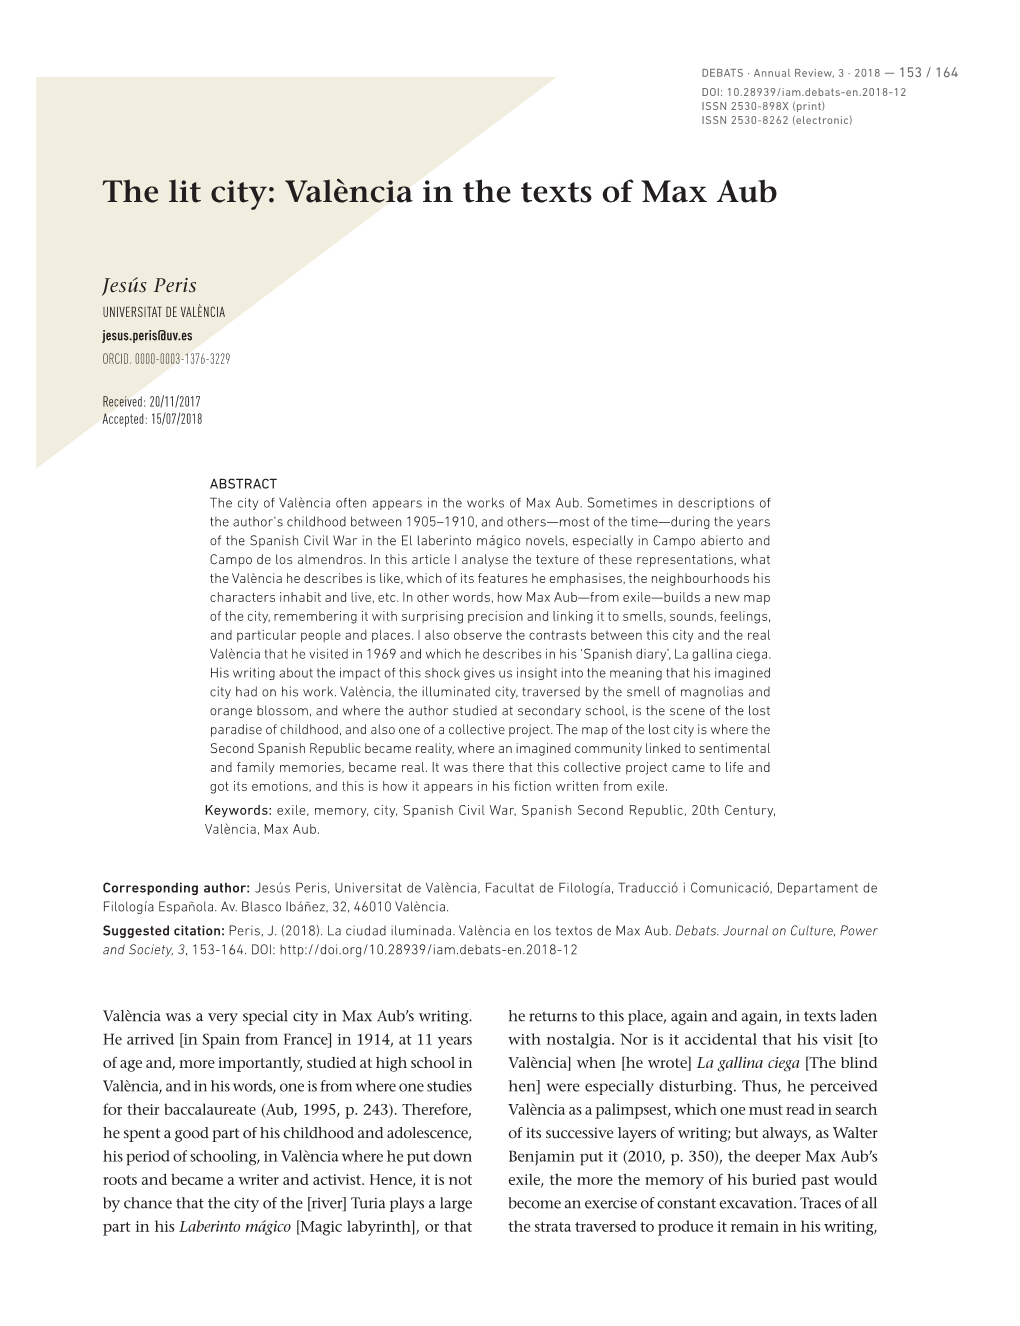 València in the Texts of Max Aub